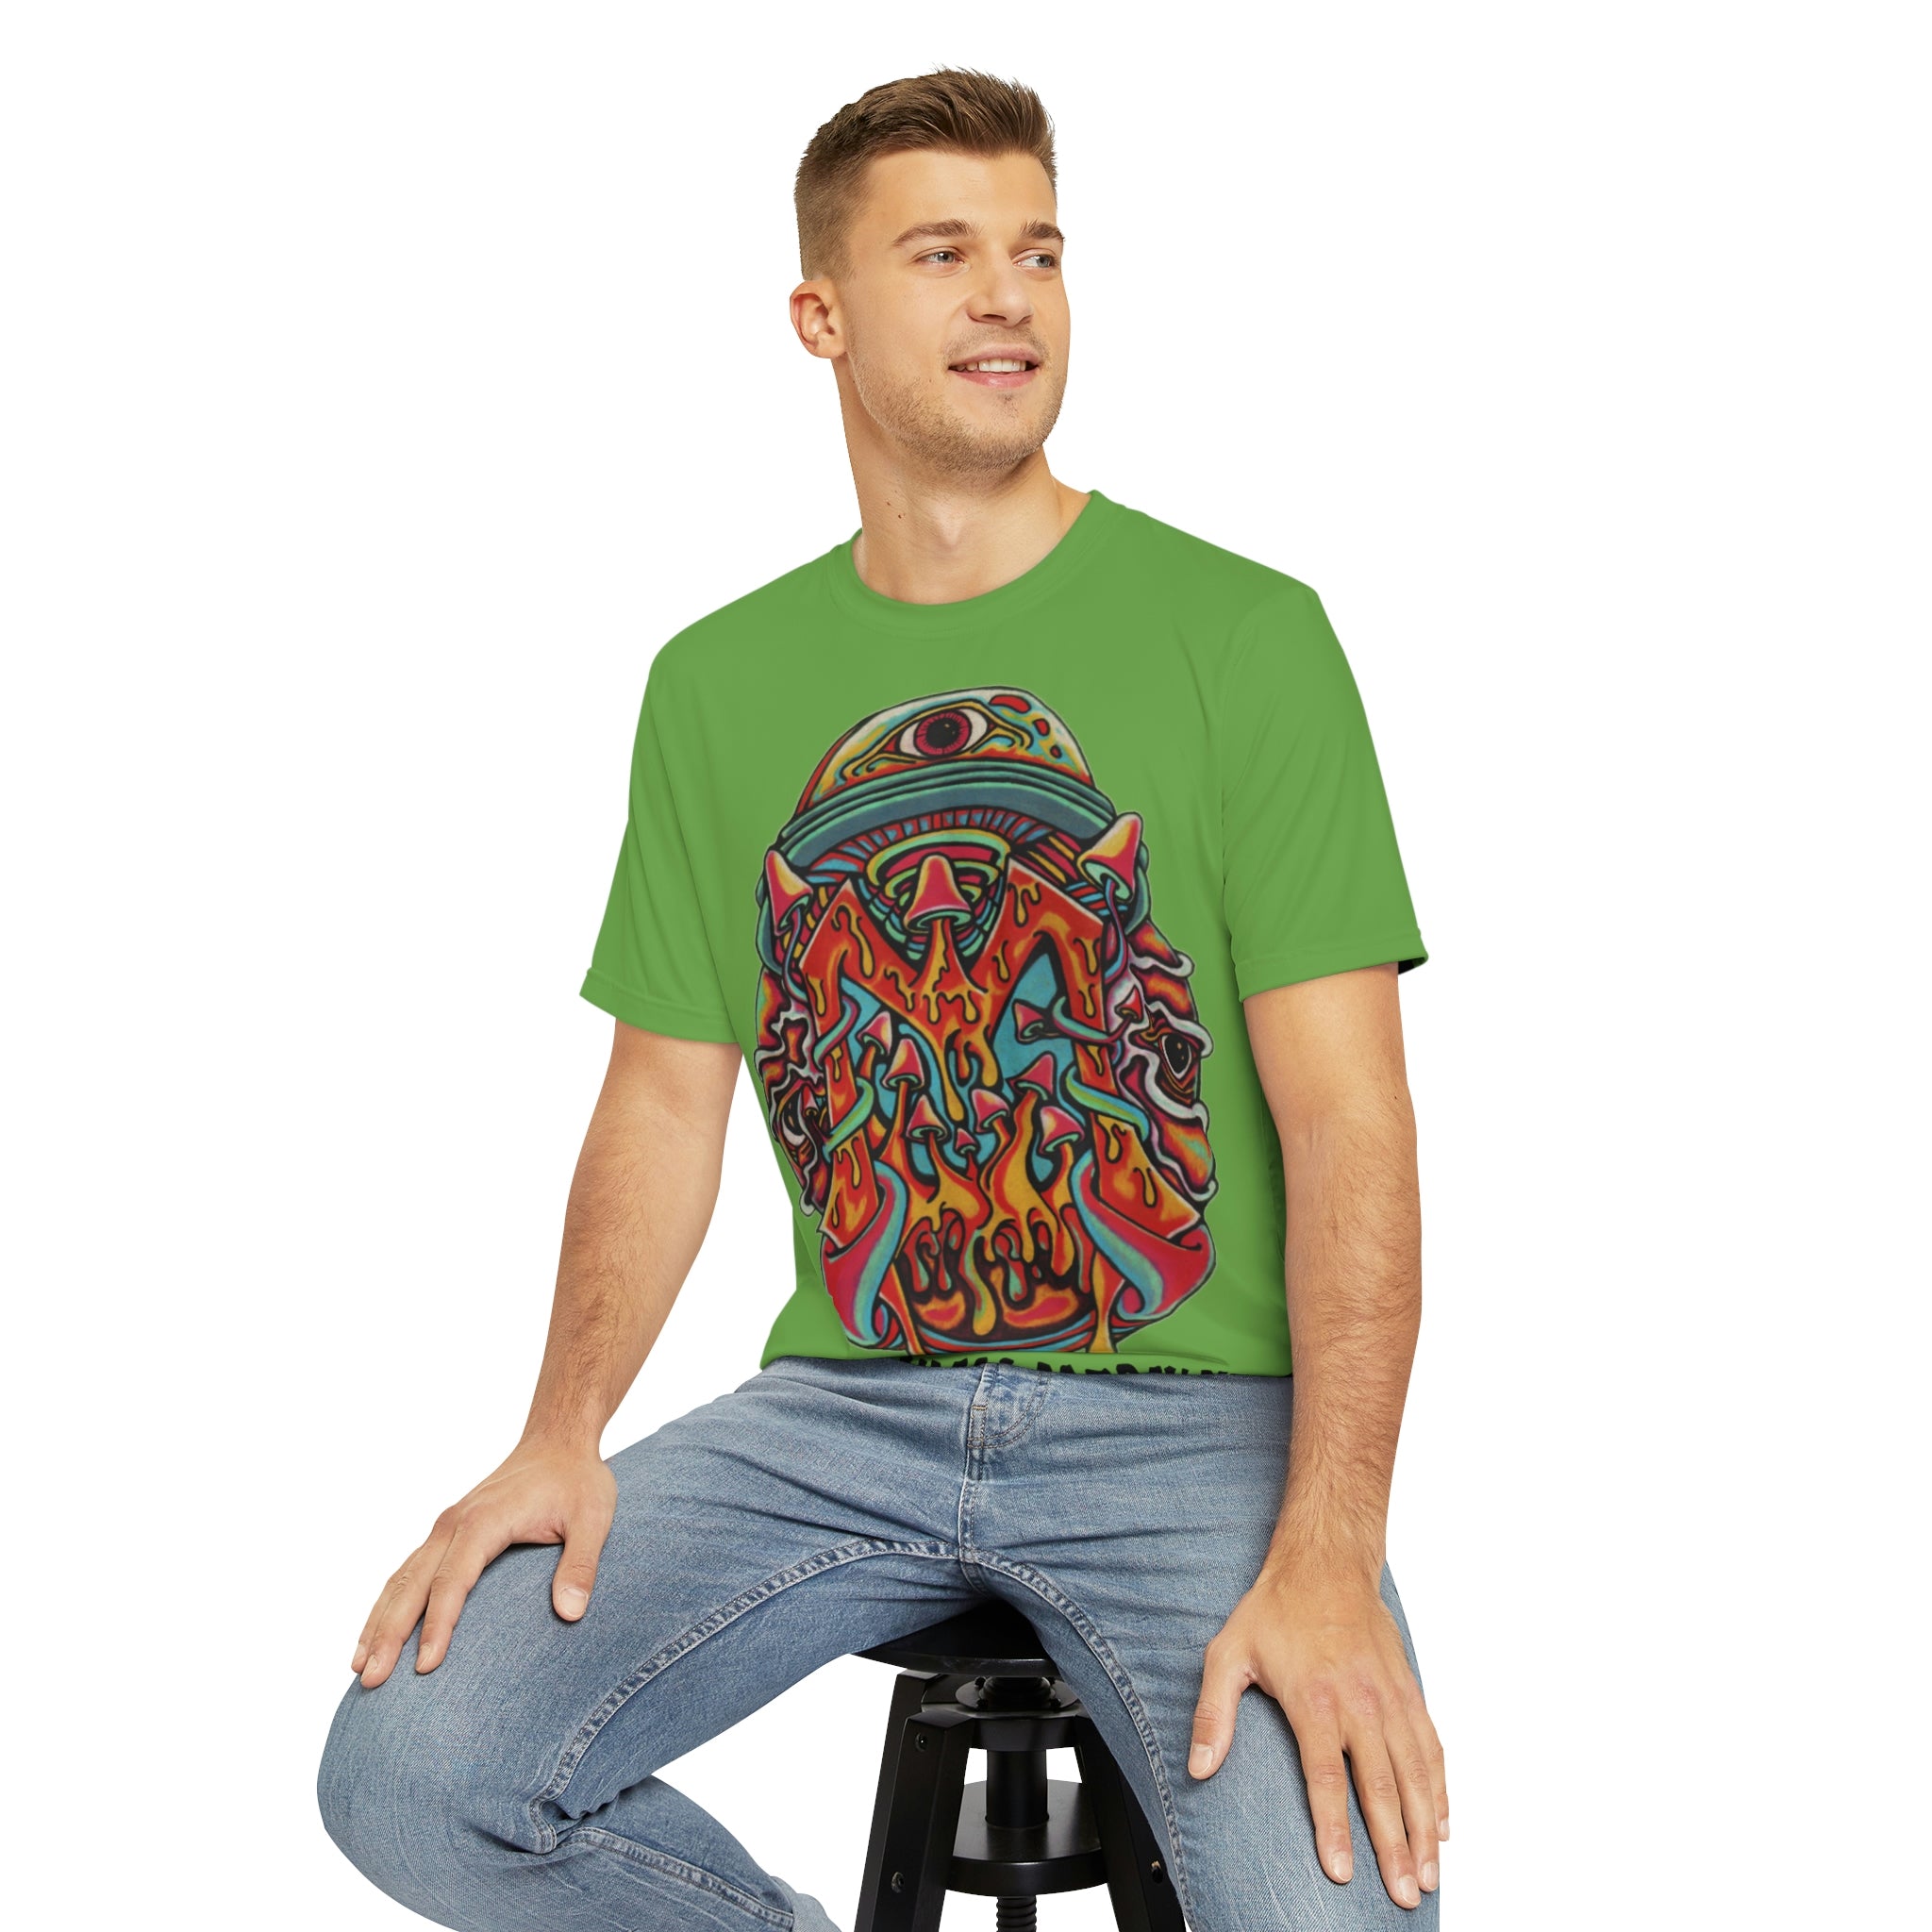 Mythical Merch Ufo Mushroom Alien Abduction Men&#39;s Polyester Tee (AOP) By Jason Portante X Mythical Merch